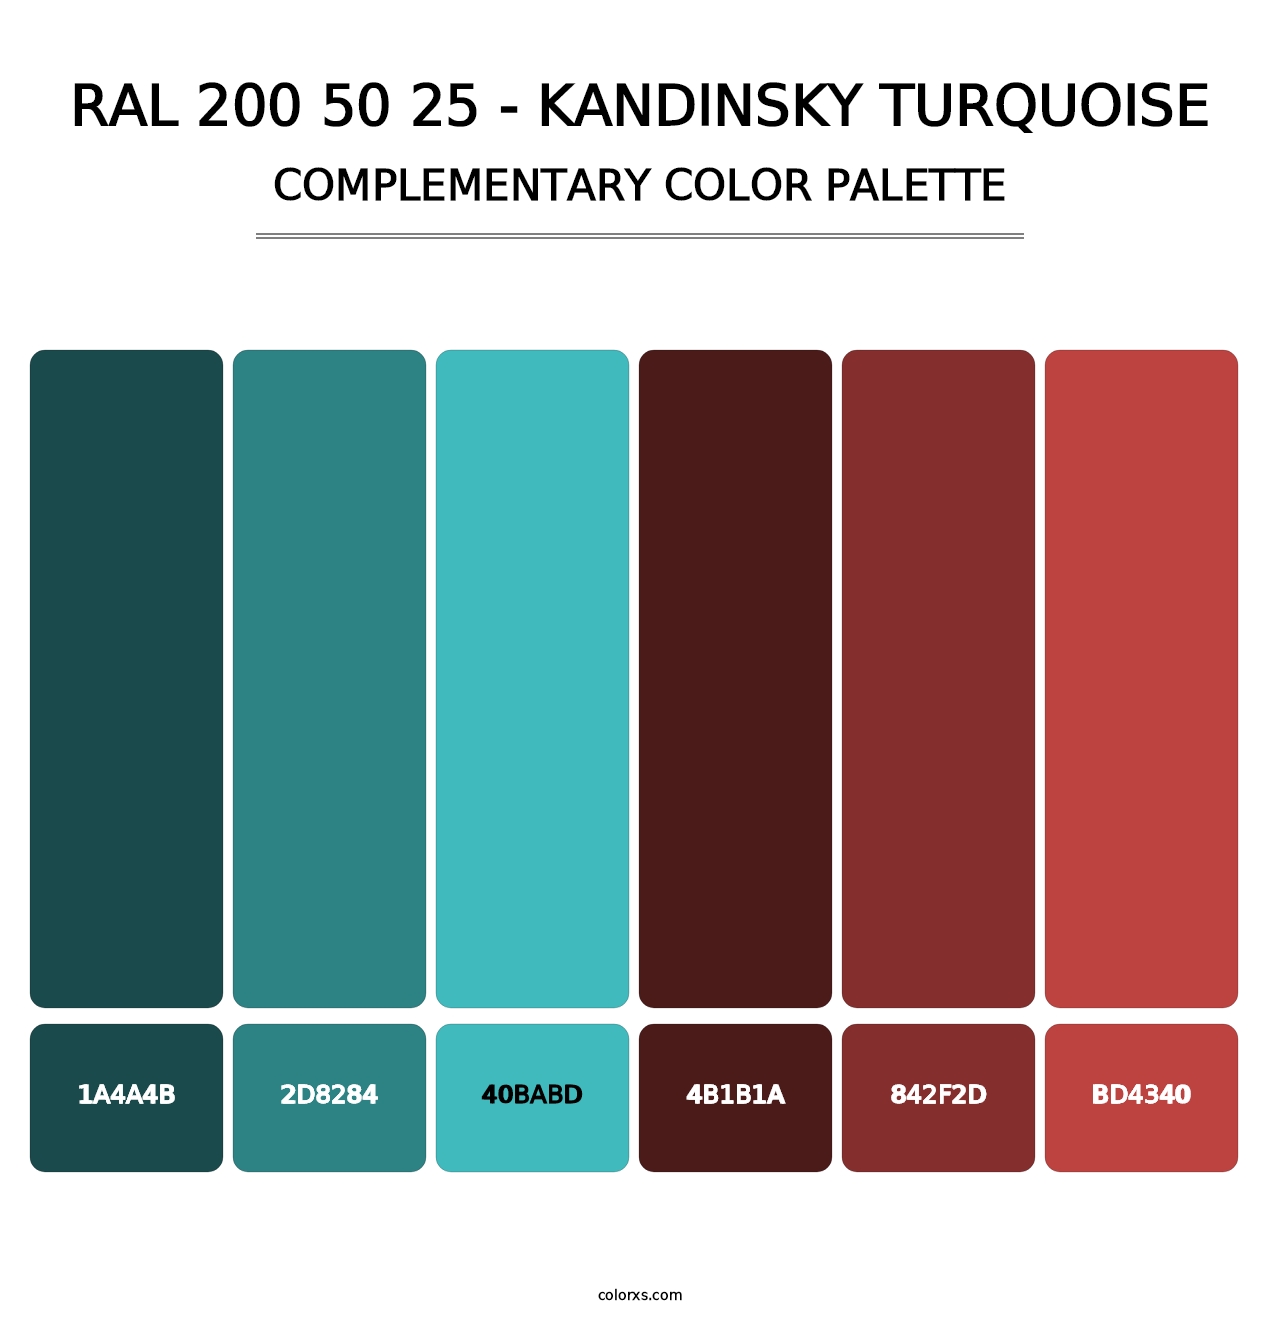 RAL 200 50 25 - Kandinsky Turquoise - Complementary Color Palette